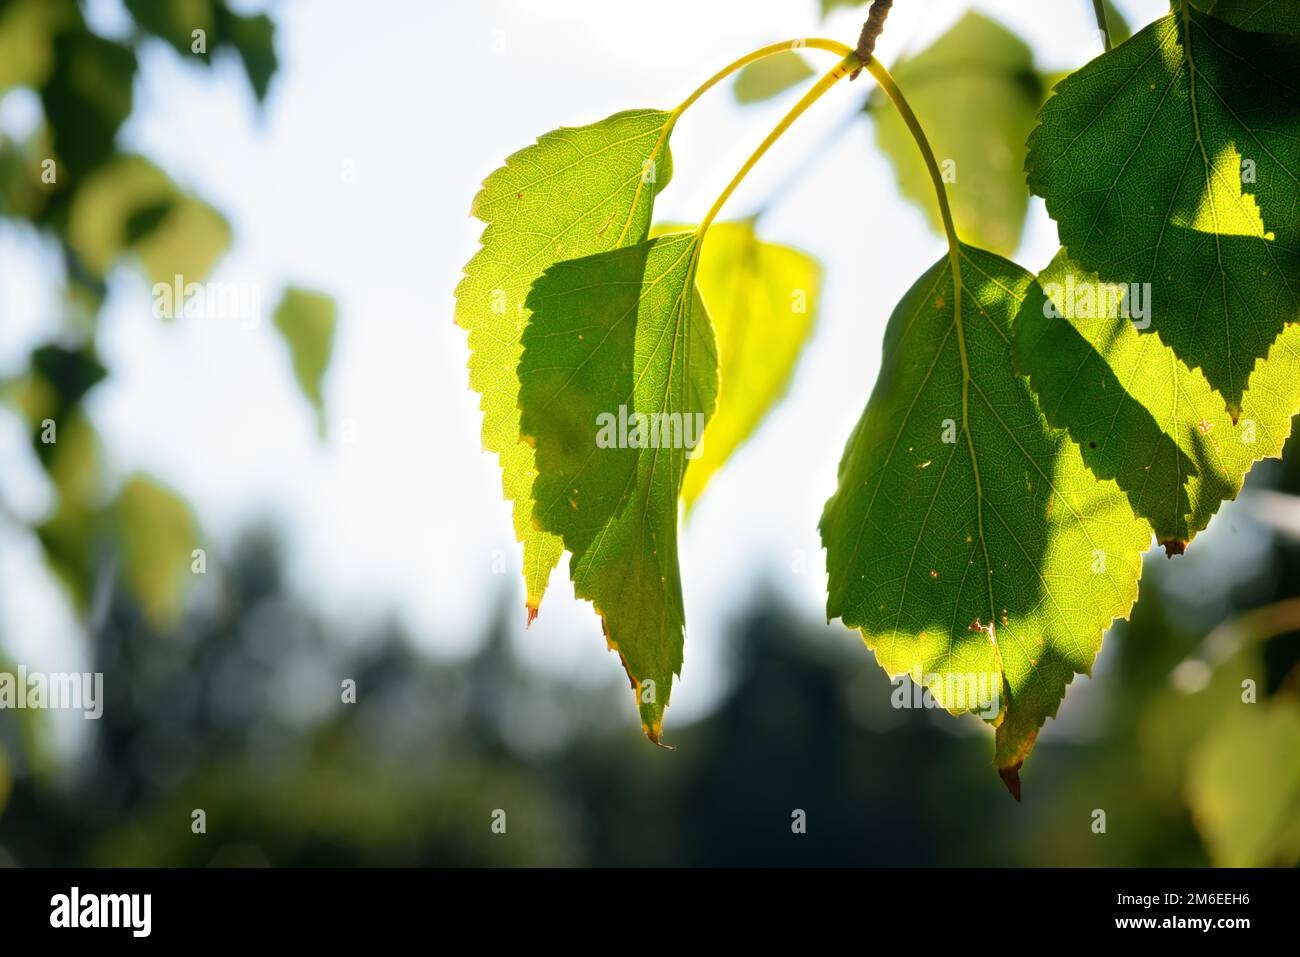 Green birch leaves in the sunlight Stock Photo